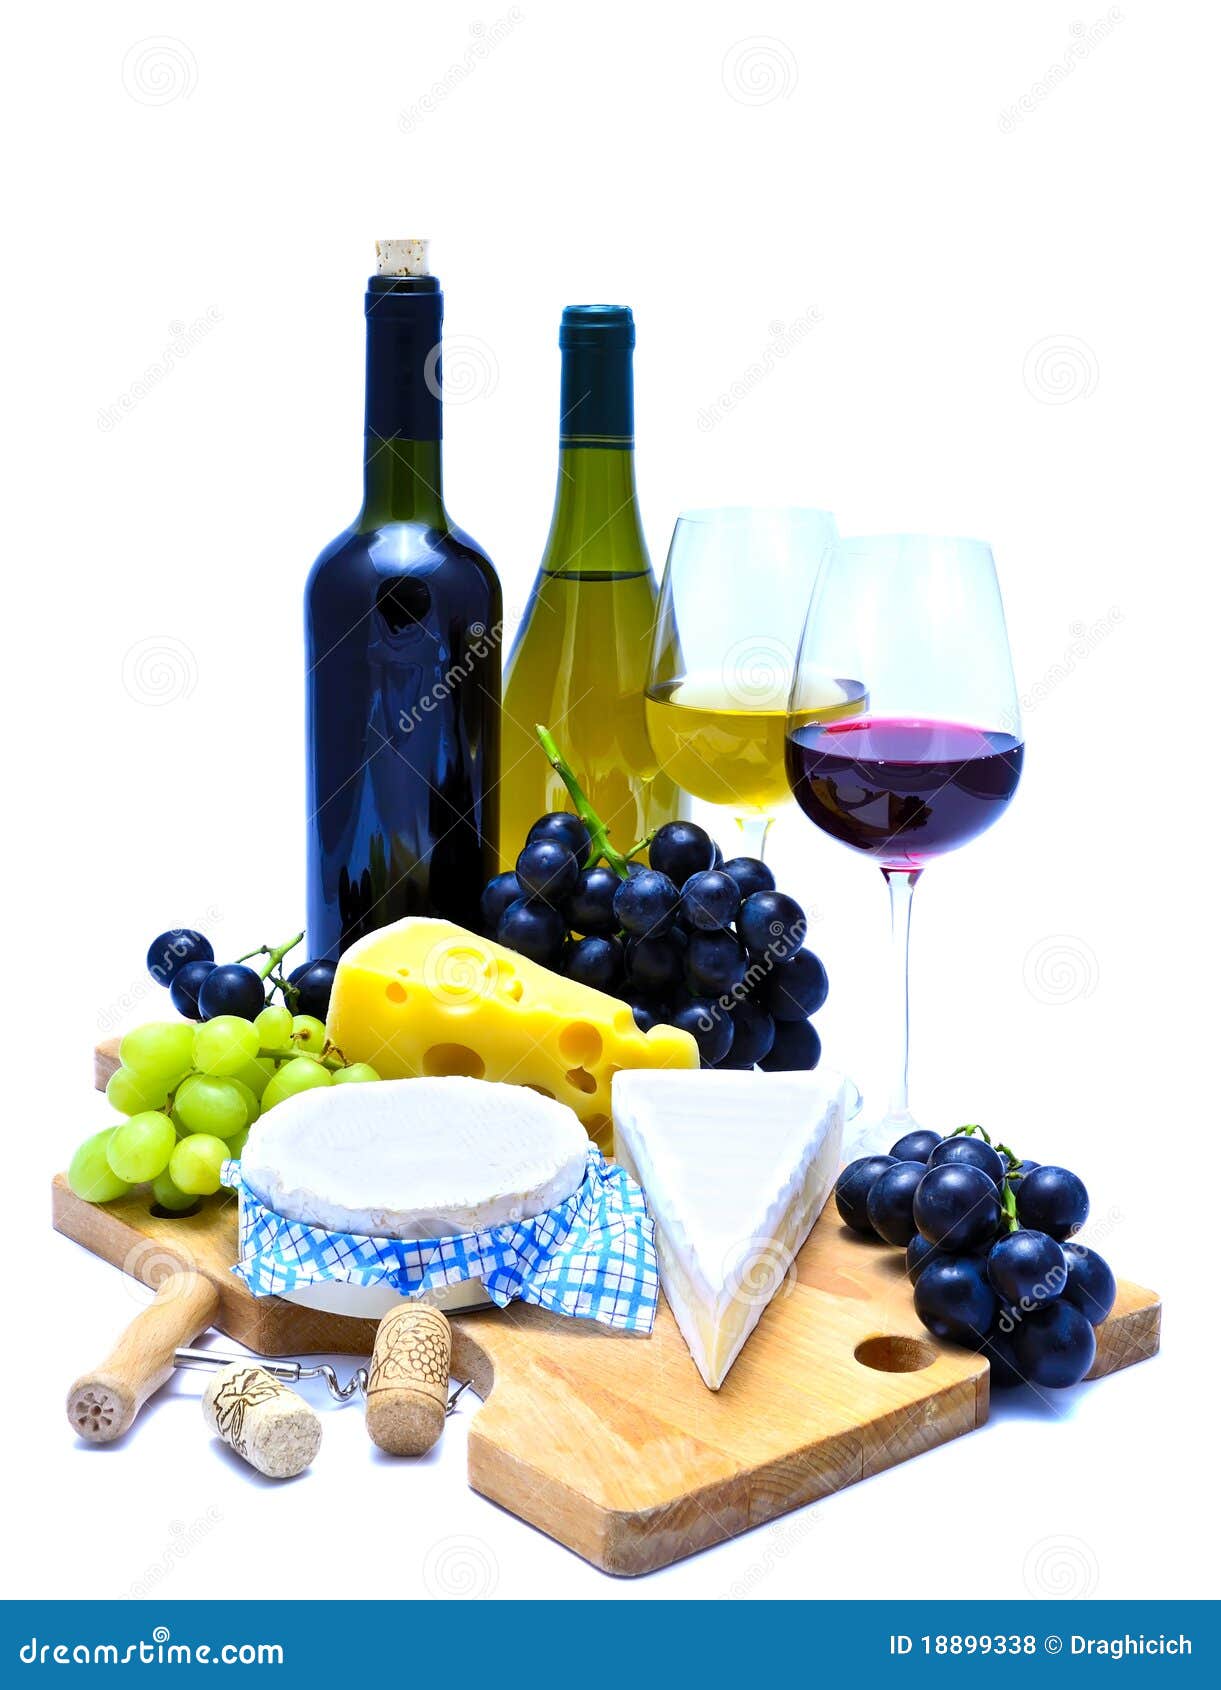 Cheese board and wine stock photo. Image of alcohol ...